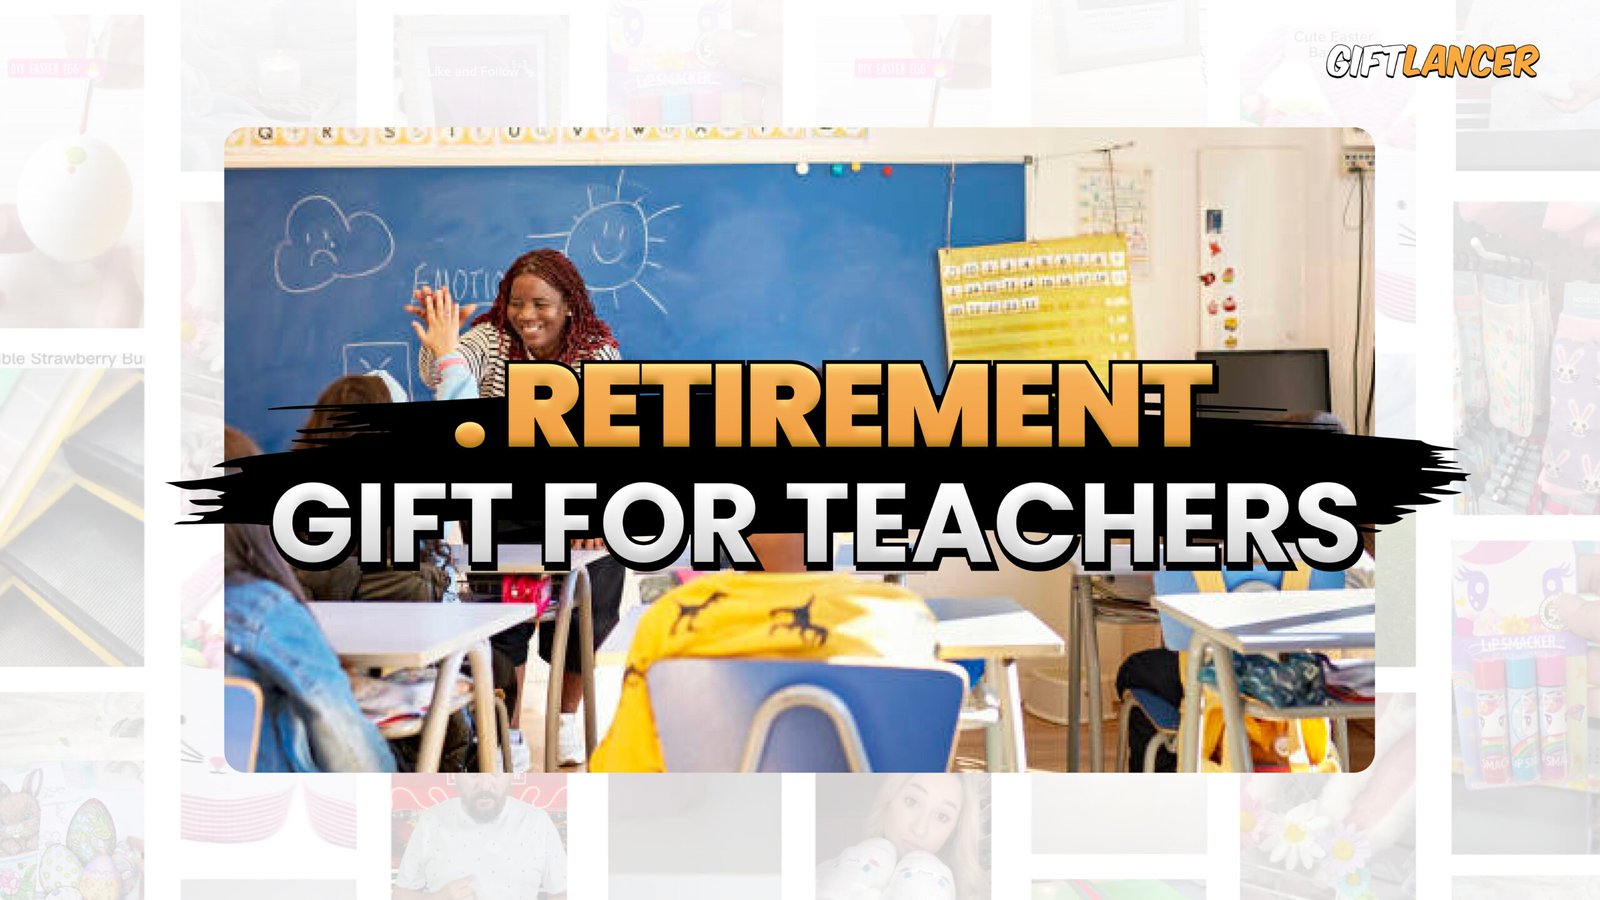 30 Teacher Retirement Gift Idea, Handpicked by a Retired Educator with Over 30 Years in the Classroom